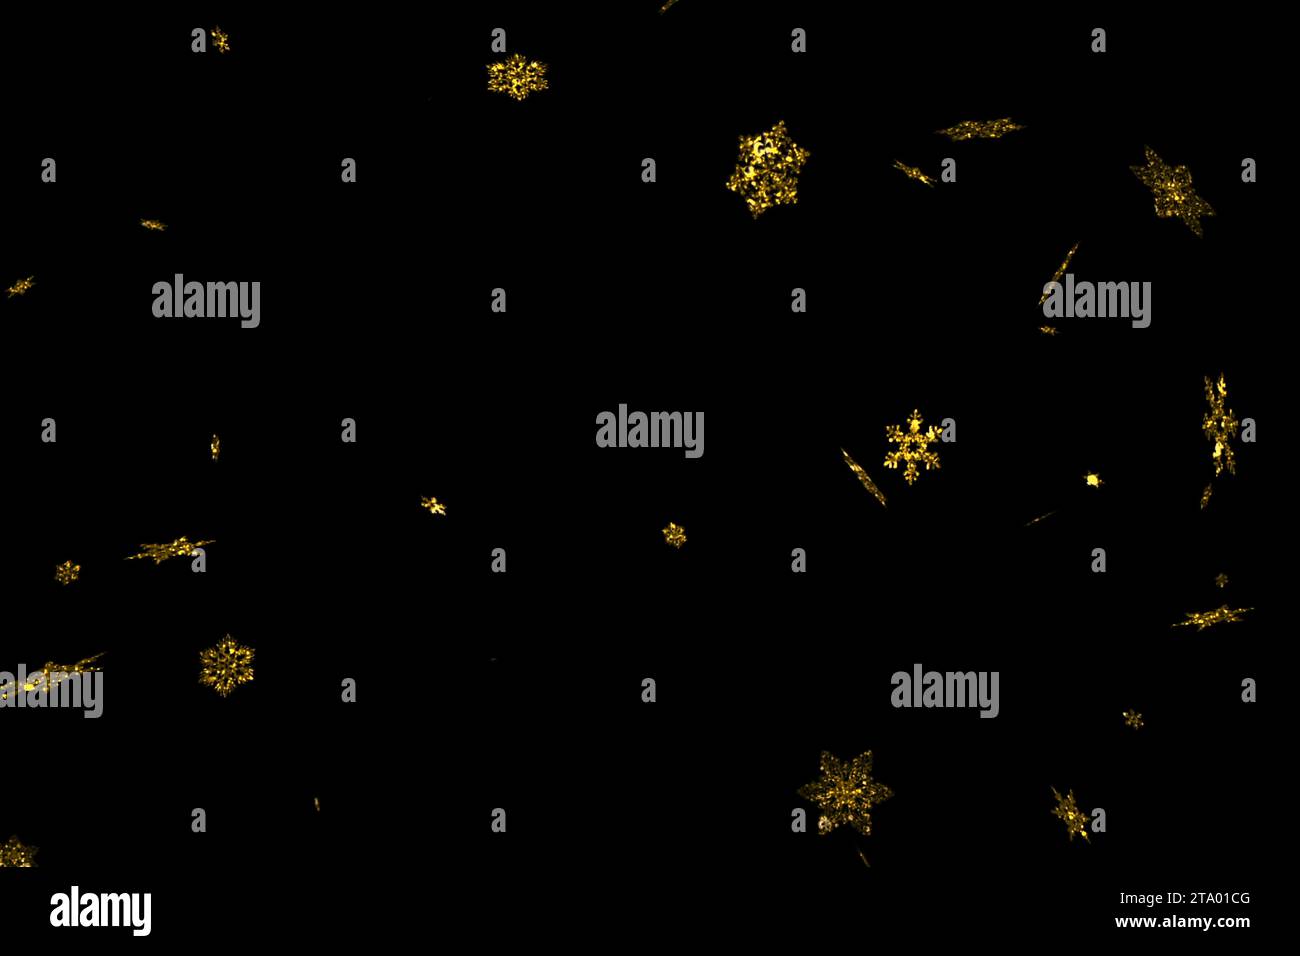 abstract gold glitter sparkle christmas snowflakes falling down snow from top, winter holiday xmas seamless loop on black background Stock Photo